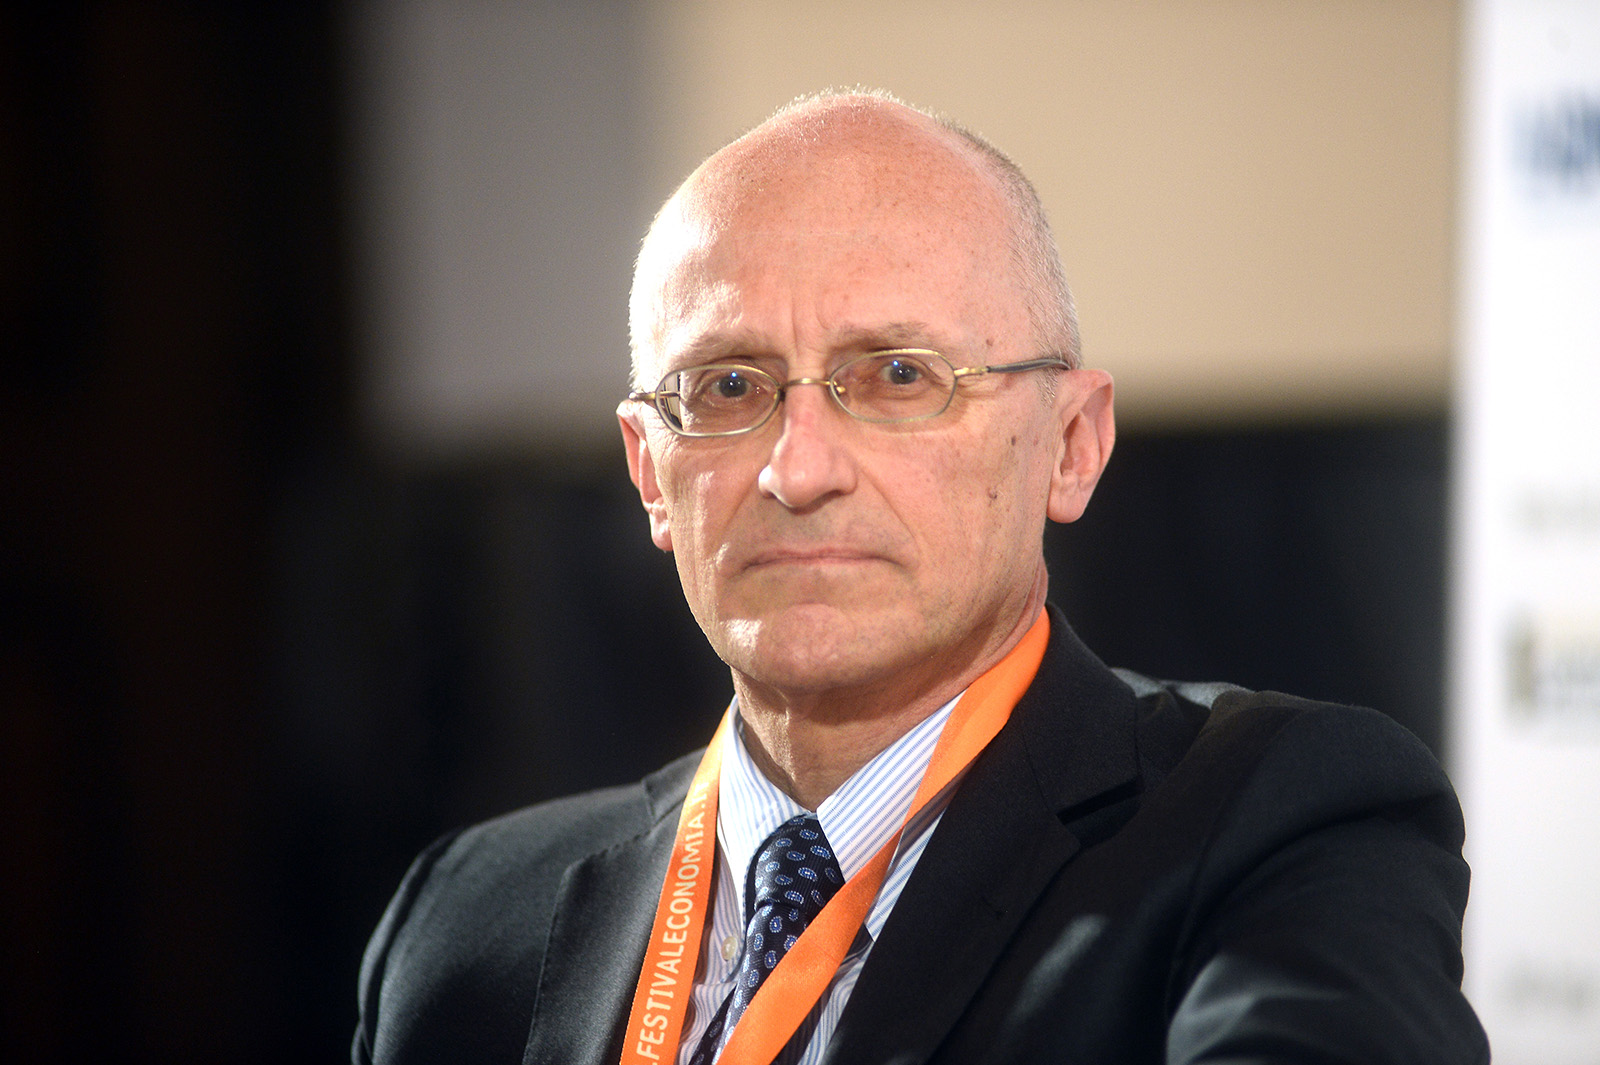 Chair of the European Central Bank's Supervisory Board Andrea Enria at the Trento Economy Festival in June 2022 in Trento, Italy. 